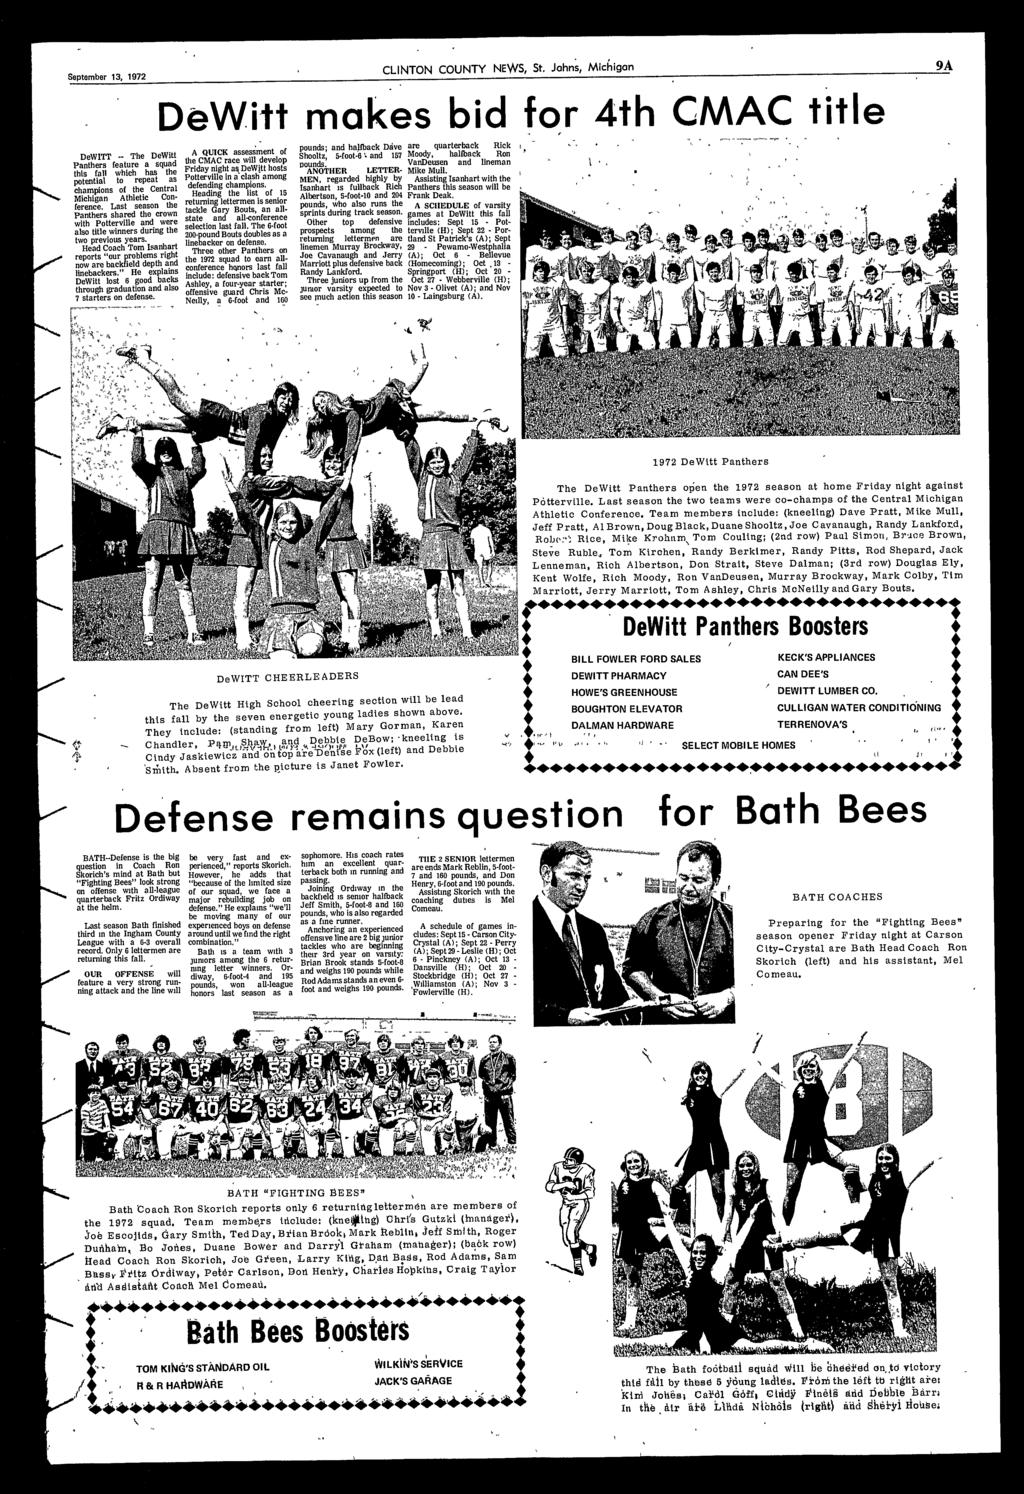 13, 1972 CLINTON COUNTY NE\VS, St Johns, Michigan 9A DeWitt makes bid for 4th CMAC title DeWITT -- The DeWitt Panthers feature a squad this fall which has the potential to repeat as champions of the